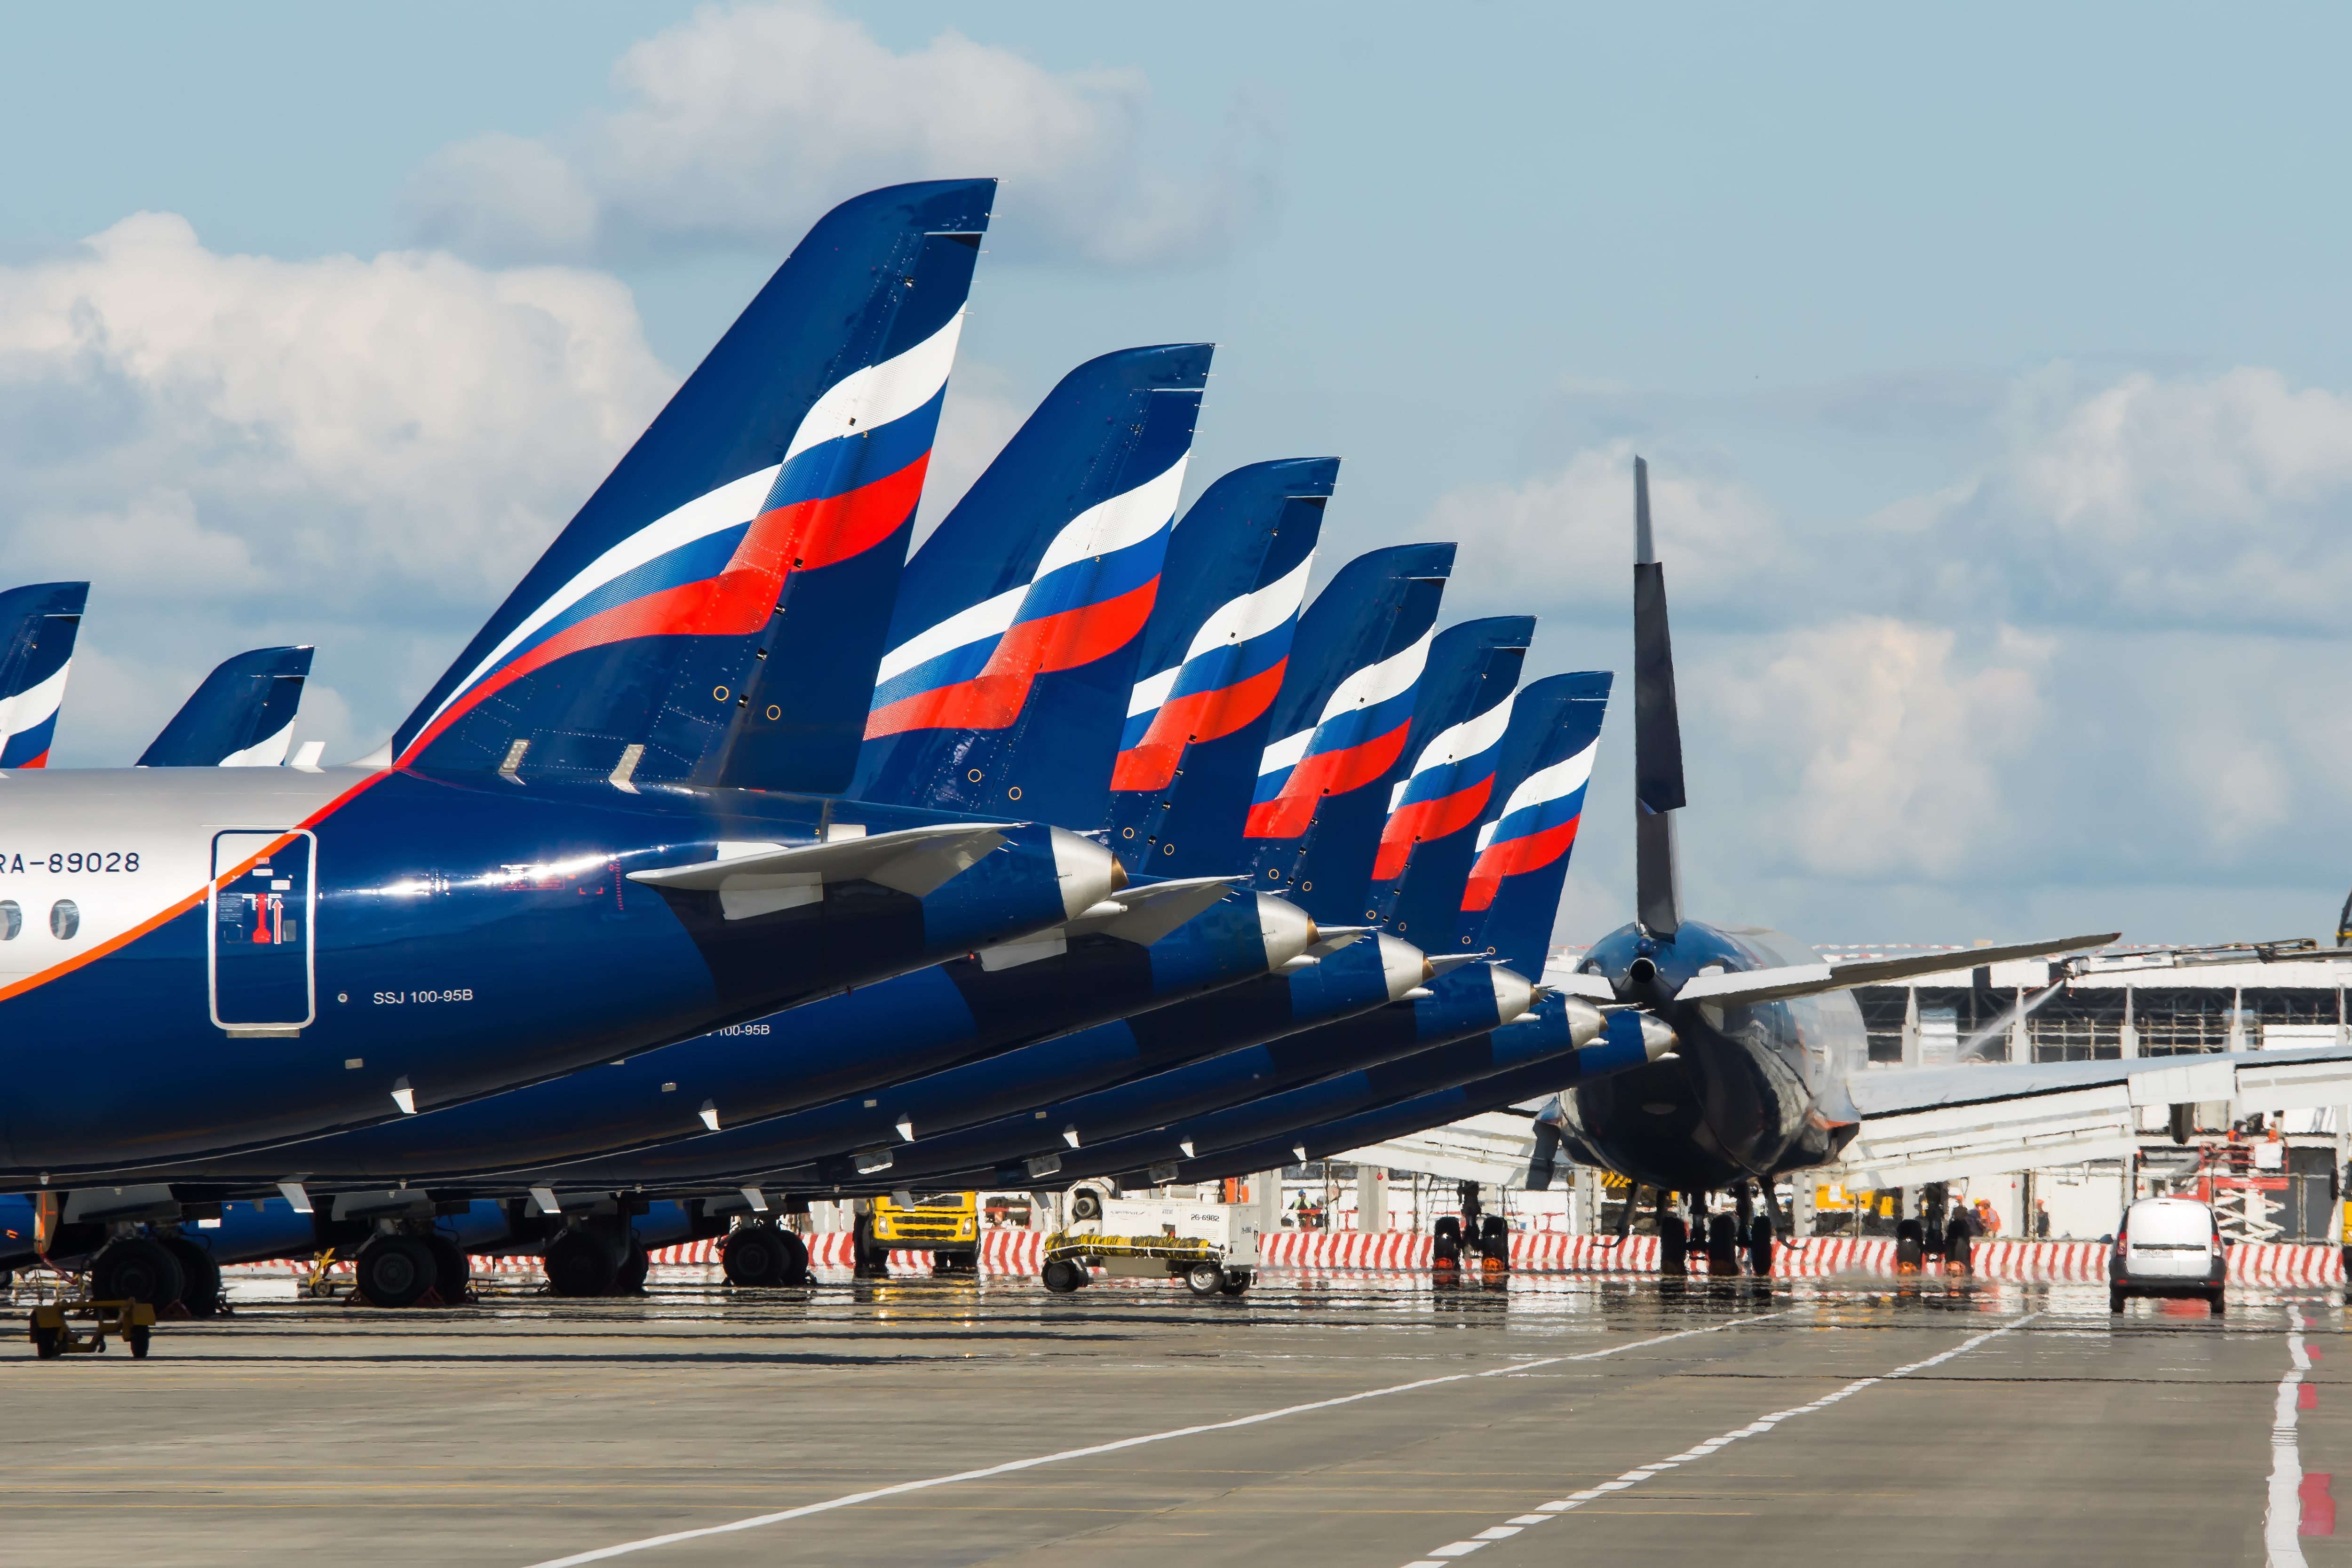 Aer Cap secured settlement for 17 Aeroflot planes that were in Russia